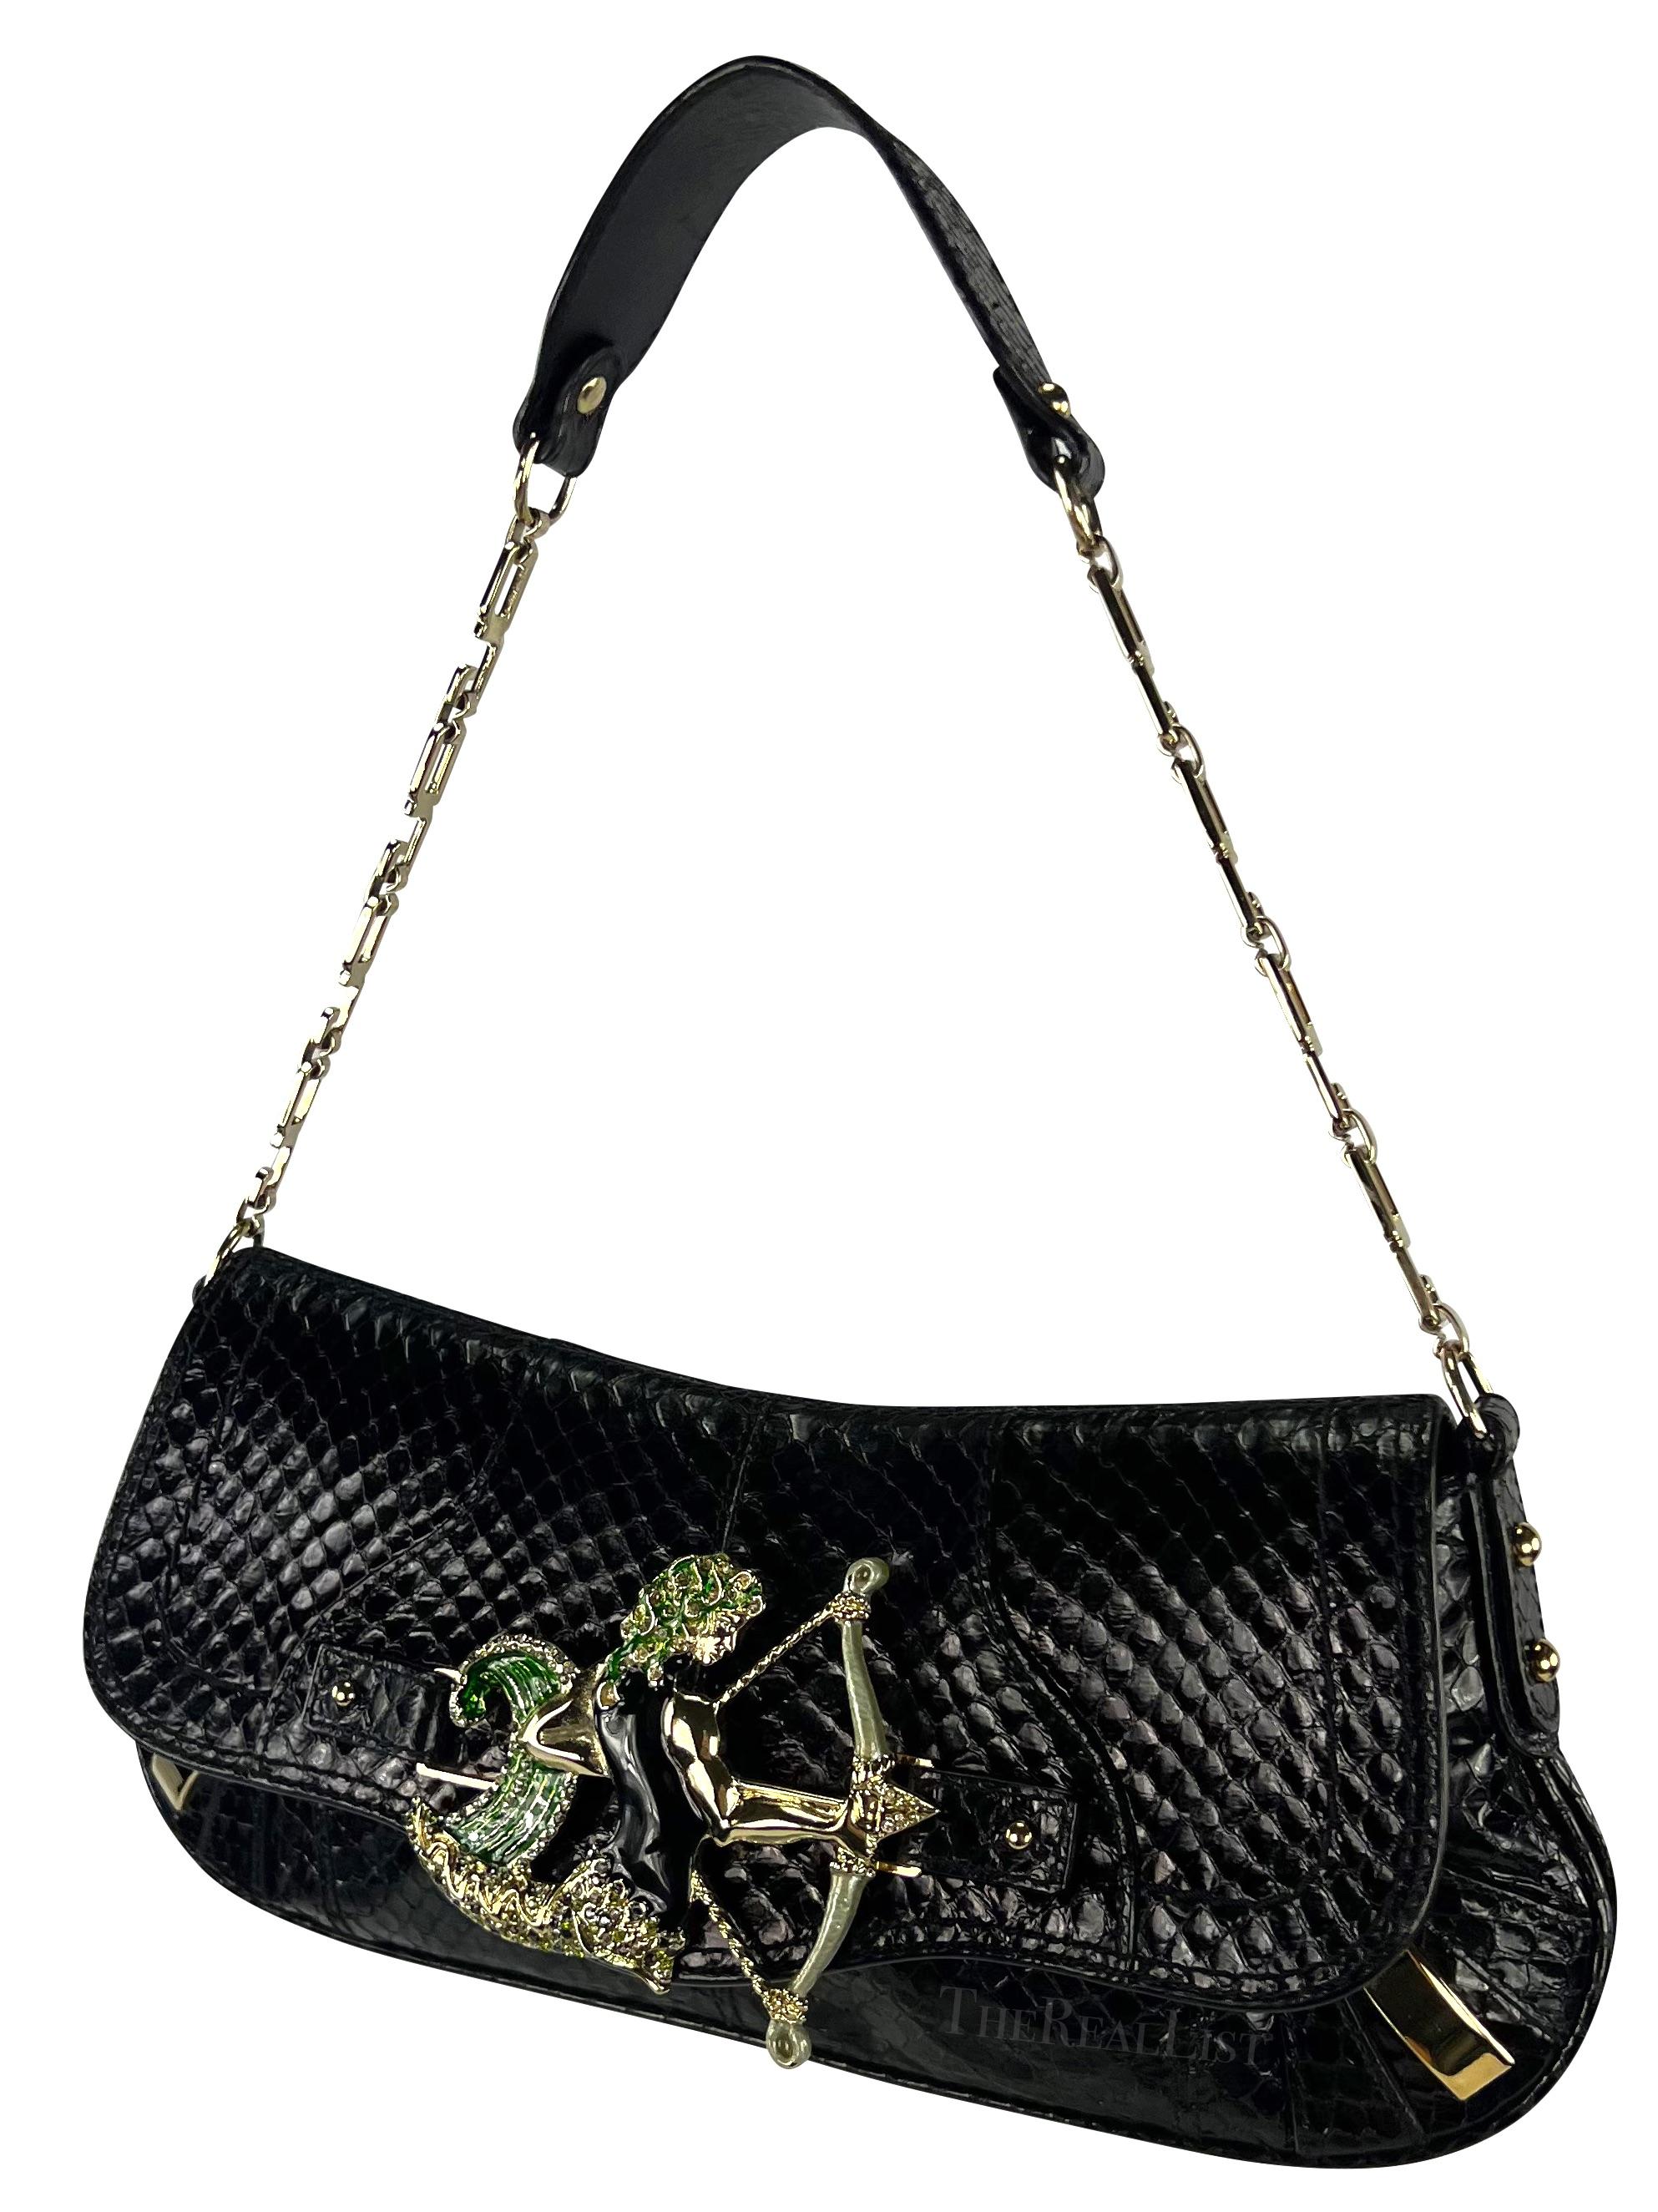 F/W 2004 Dolce & Gabbana Black Python Sagittarius Horoscope Shoulder Bag In Excellent Condition For Sale In West Hollywood, CA